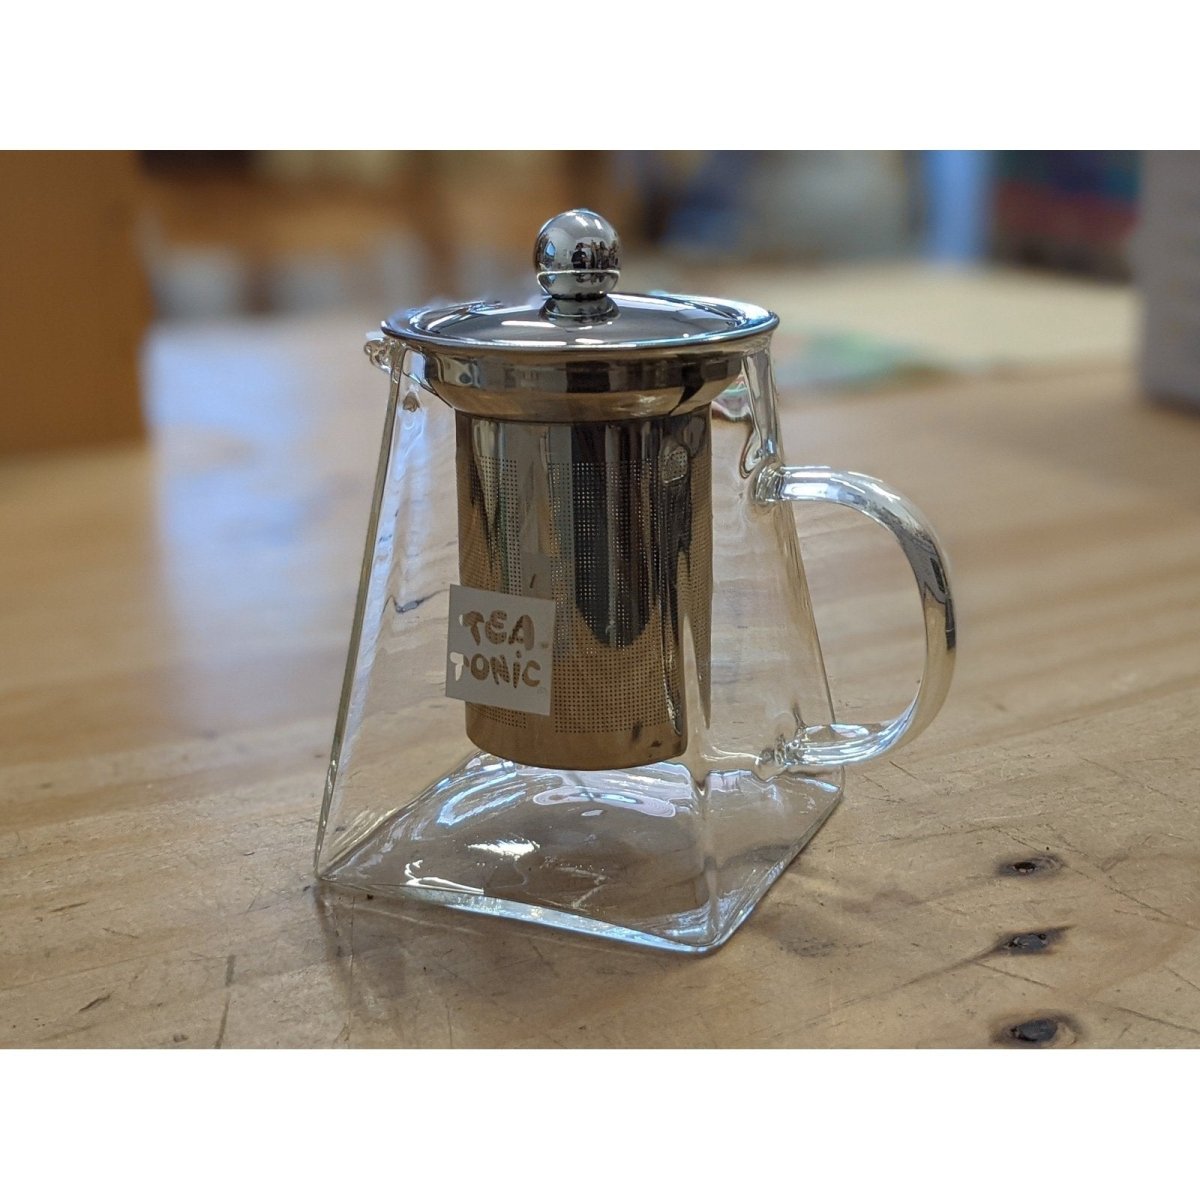 Tea Tonic glass teapot with fine stainless steel infuser. Two cup glass tea pot, waste free, plastic free, 400mL, side view